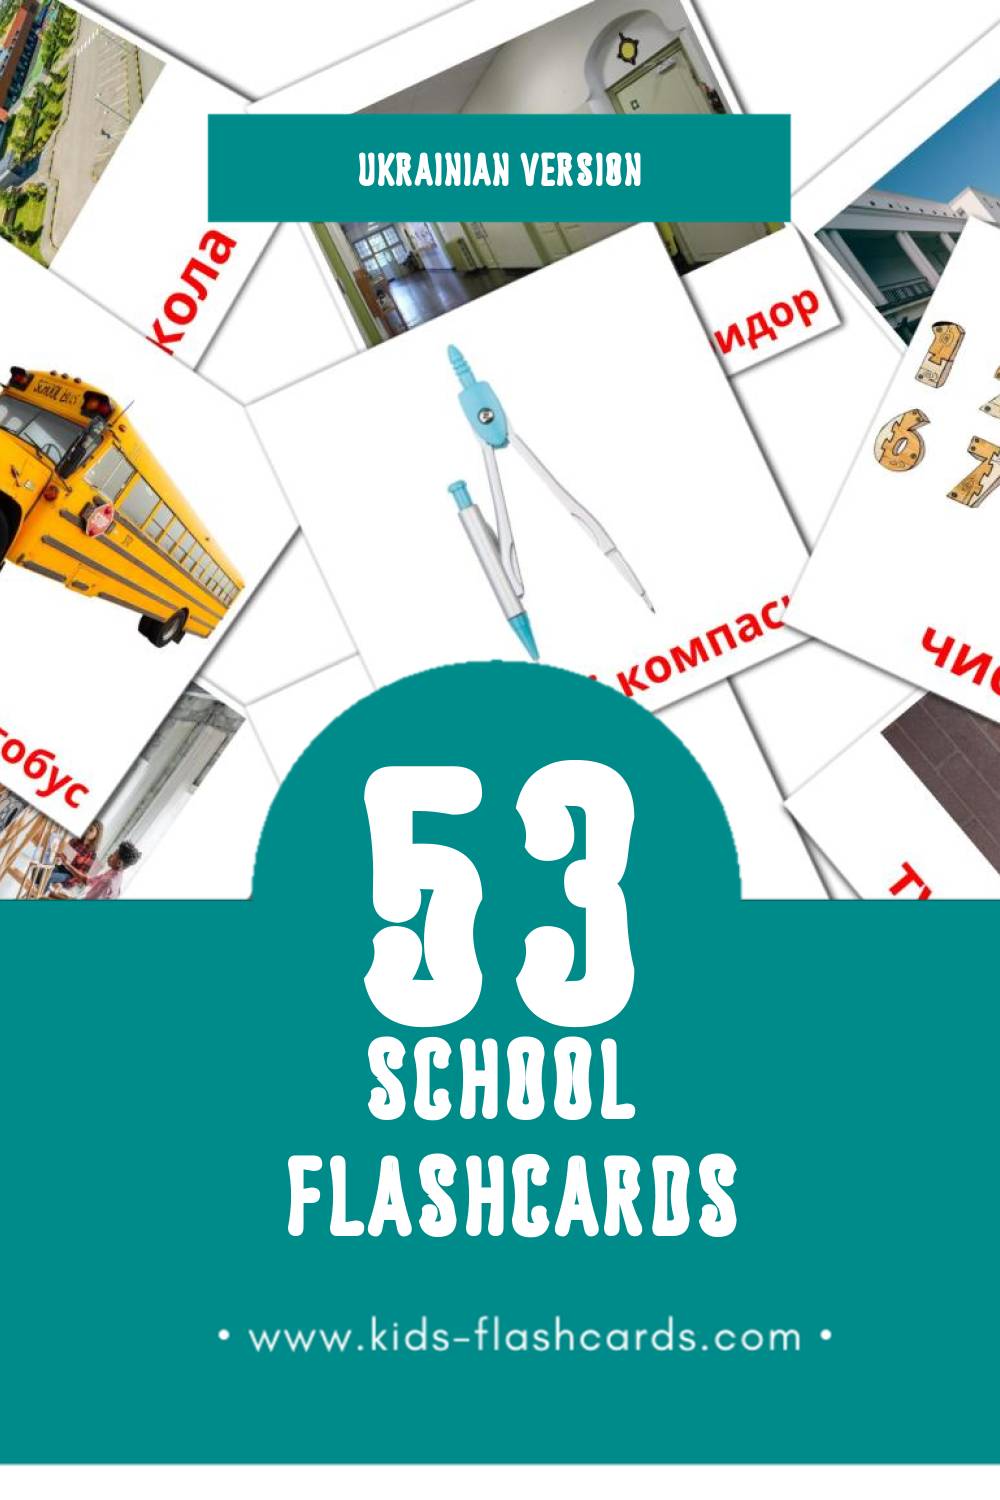 Visual Школа Flashcards for Toddlers (53 cards in Ukrainian)